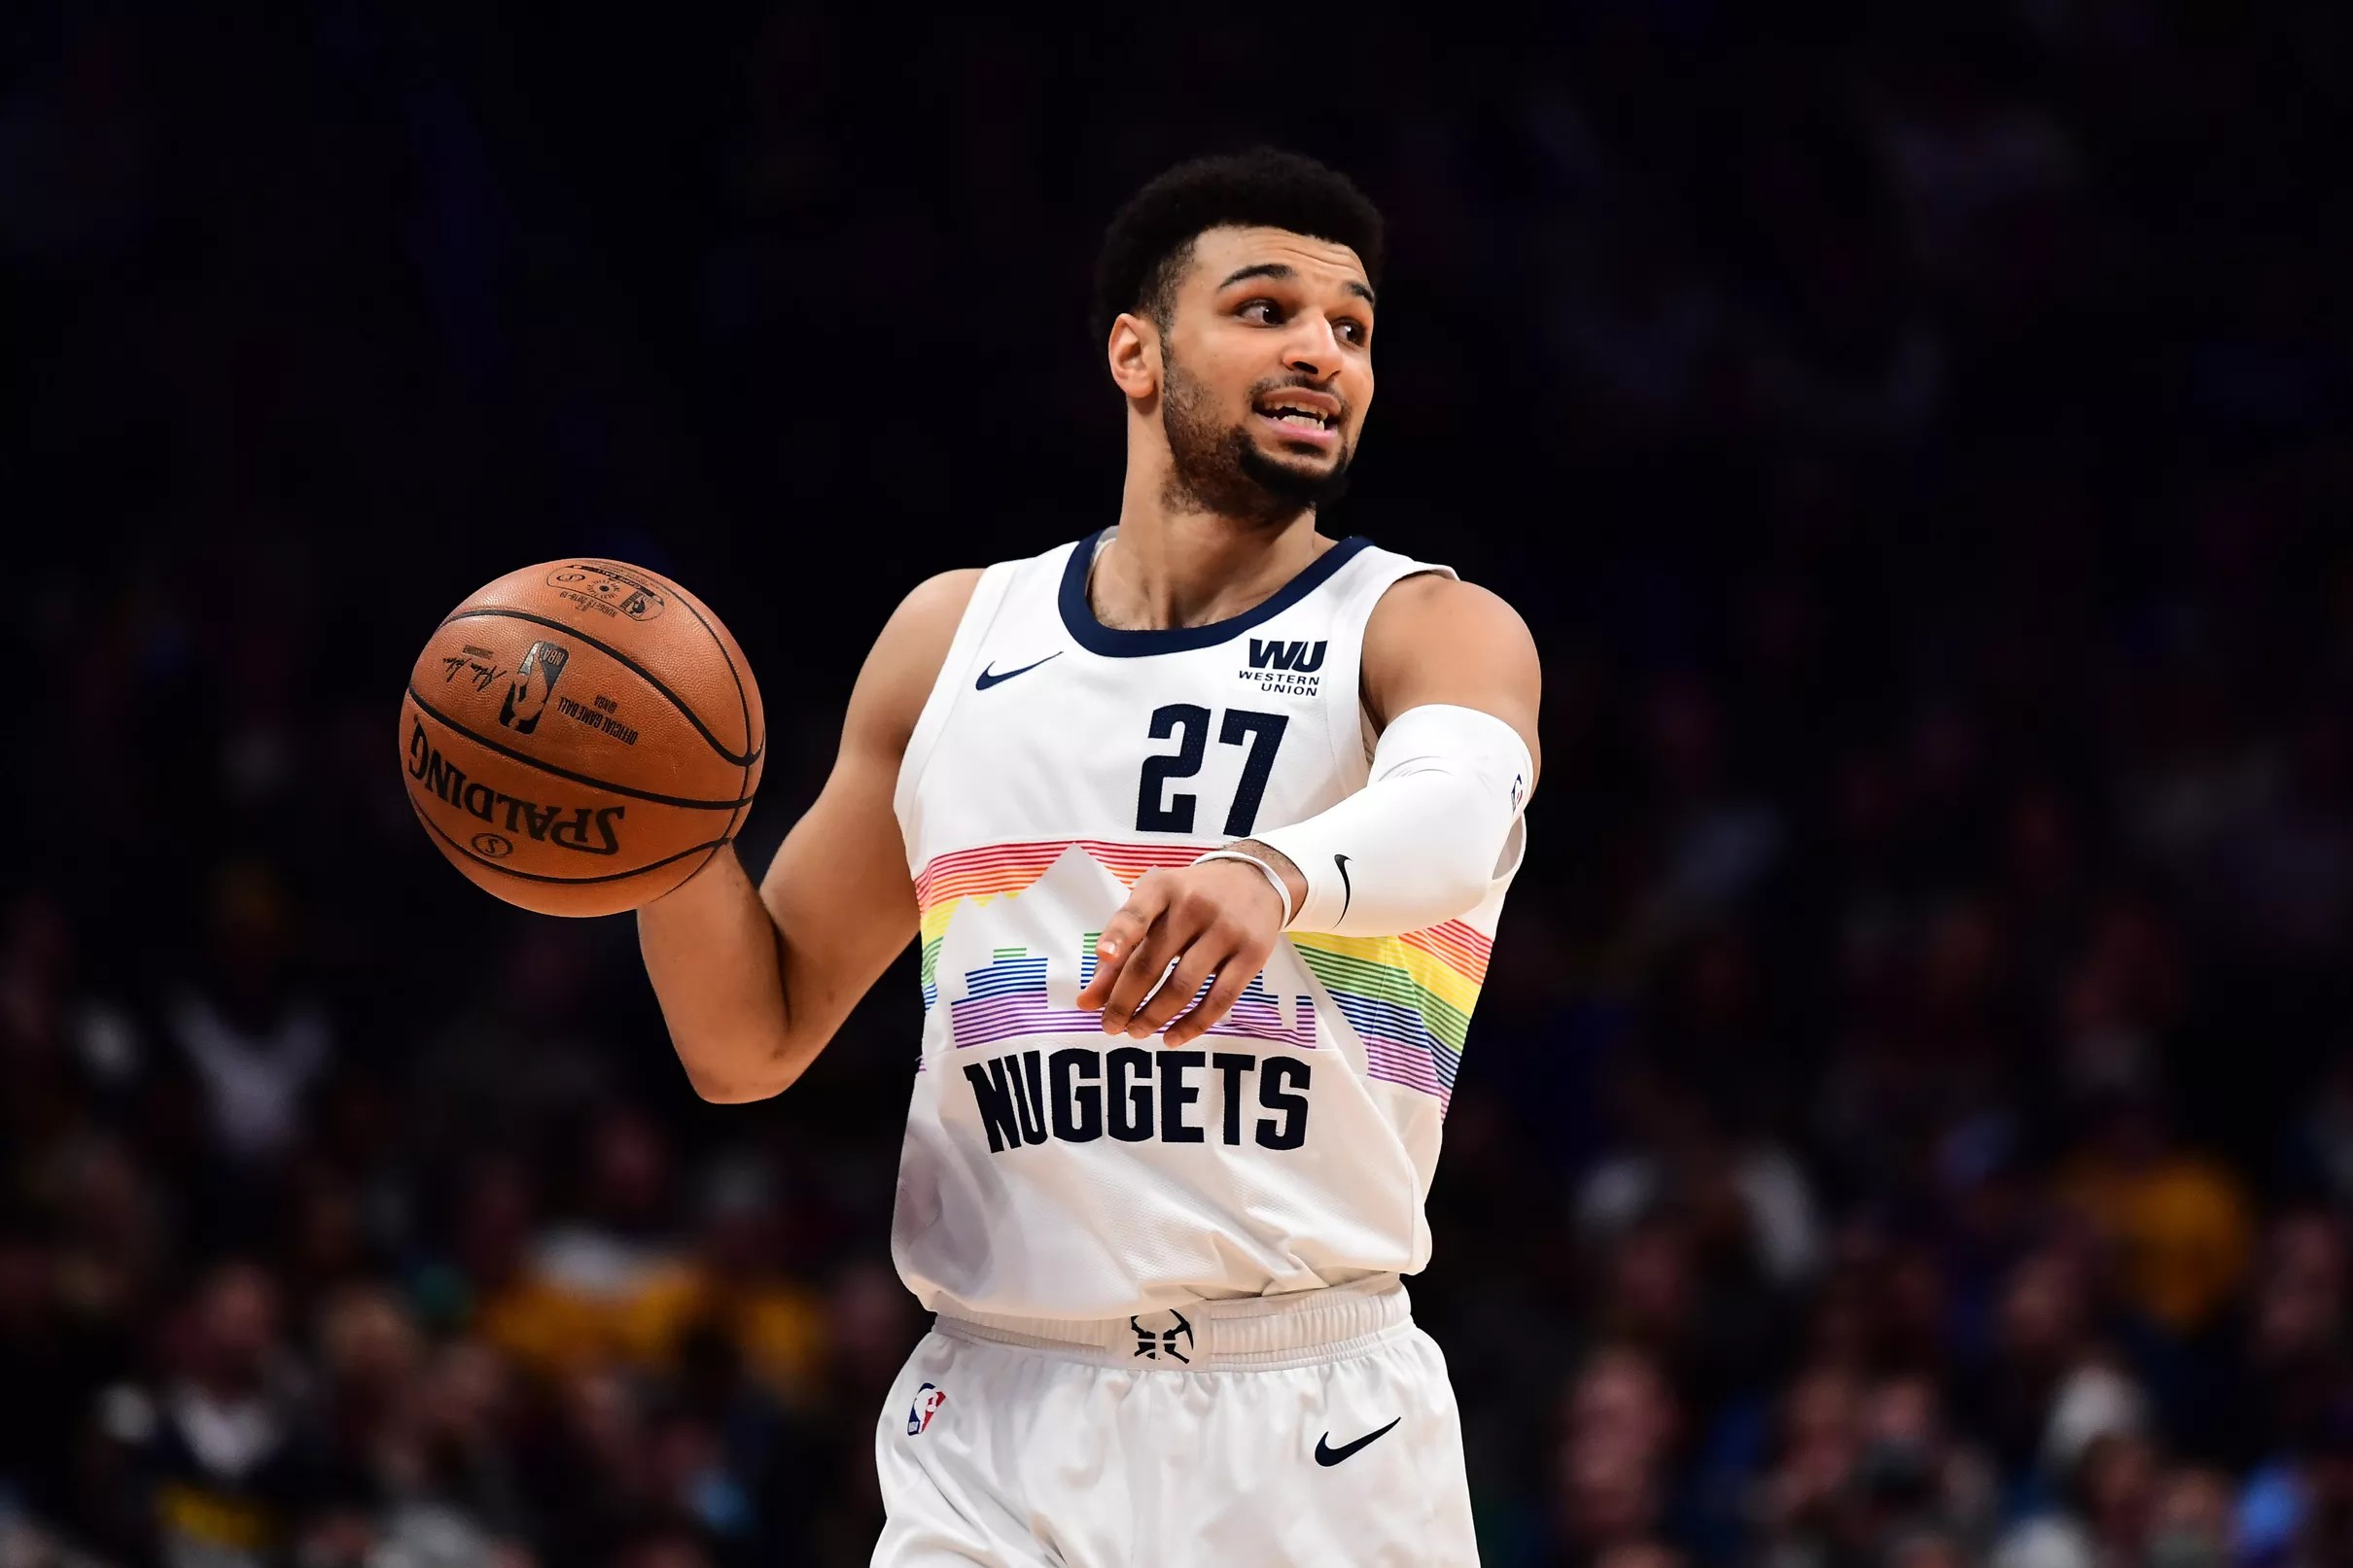 Roundtable Denver Nuggets clinch two seed, will face San Antonio Spurs